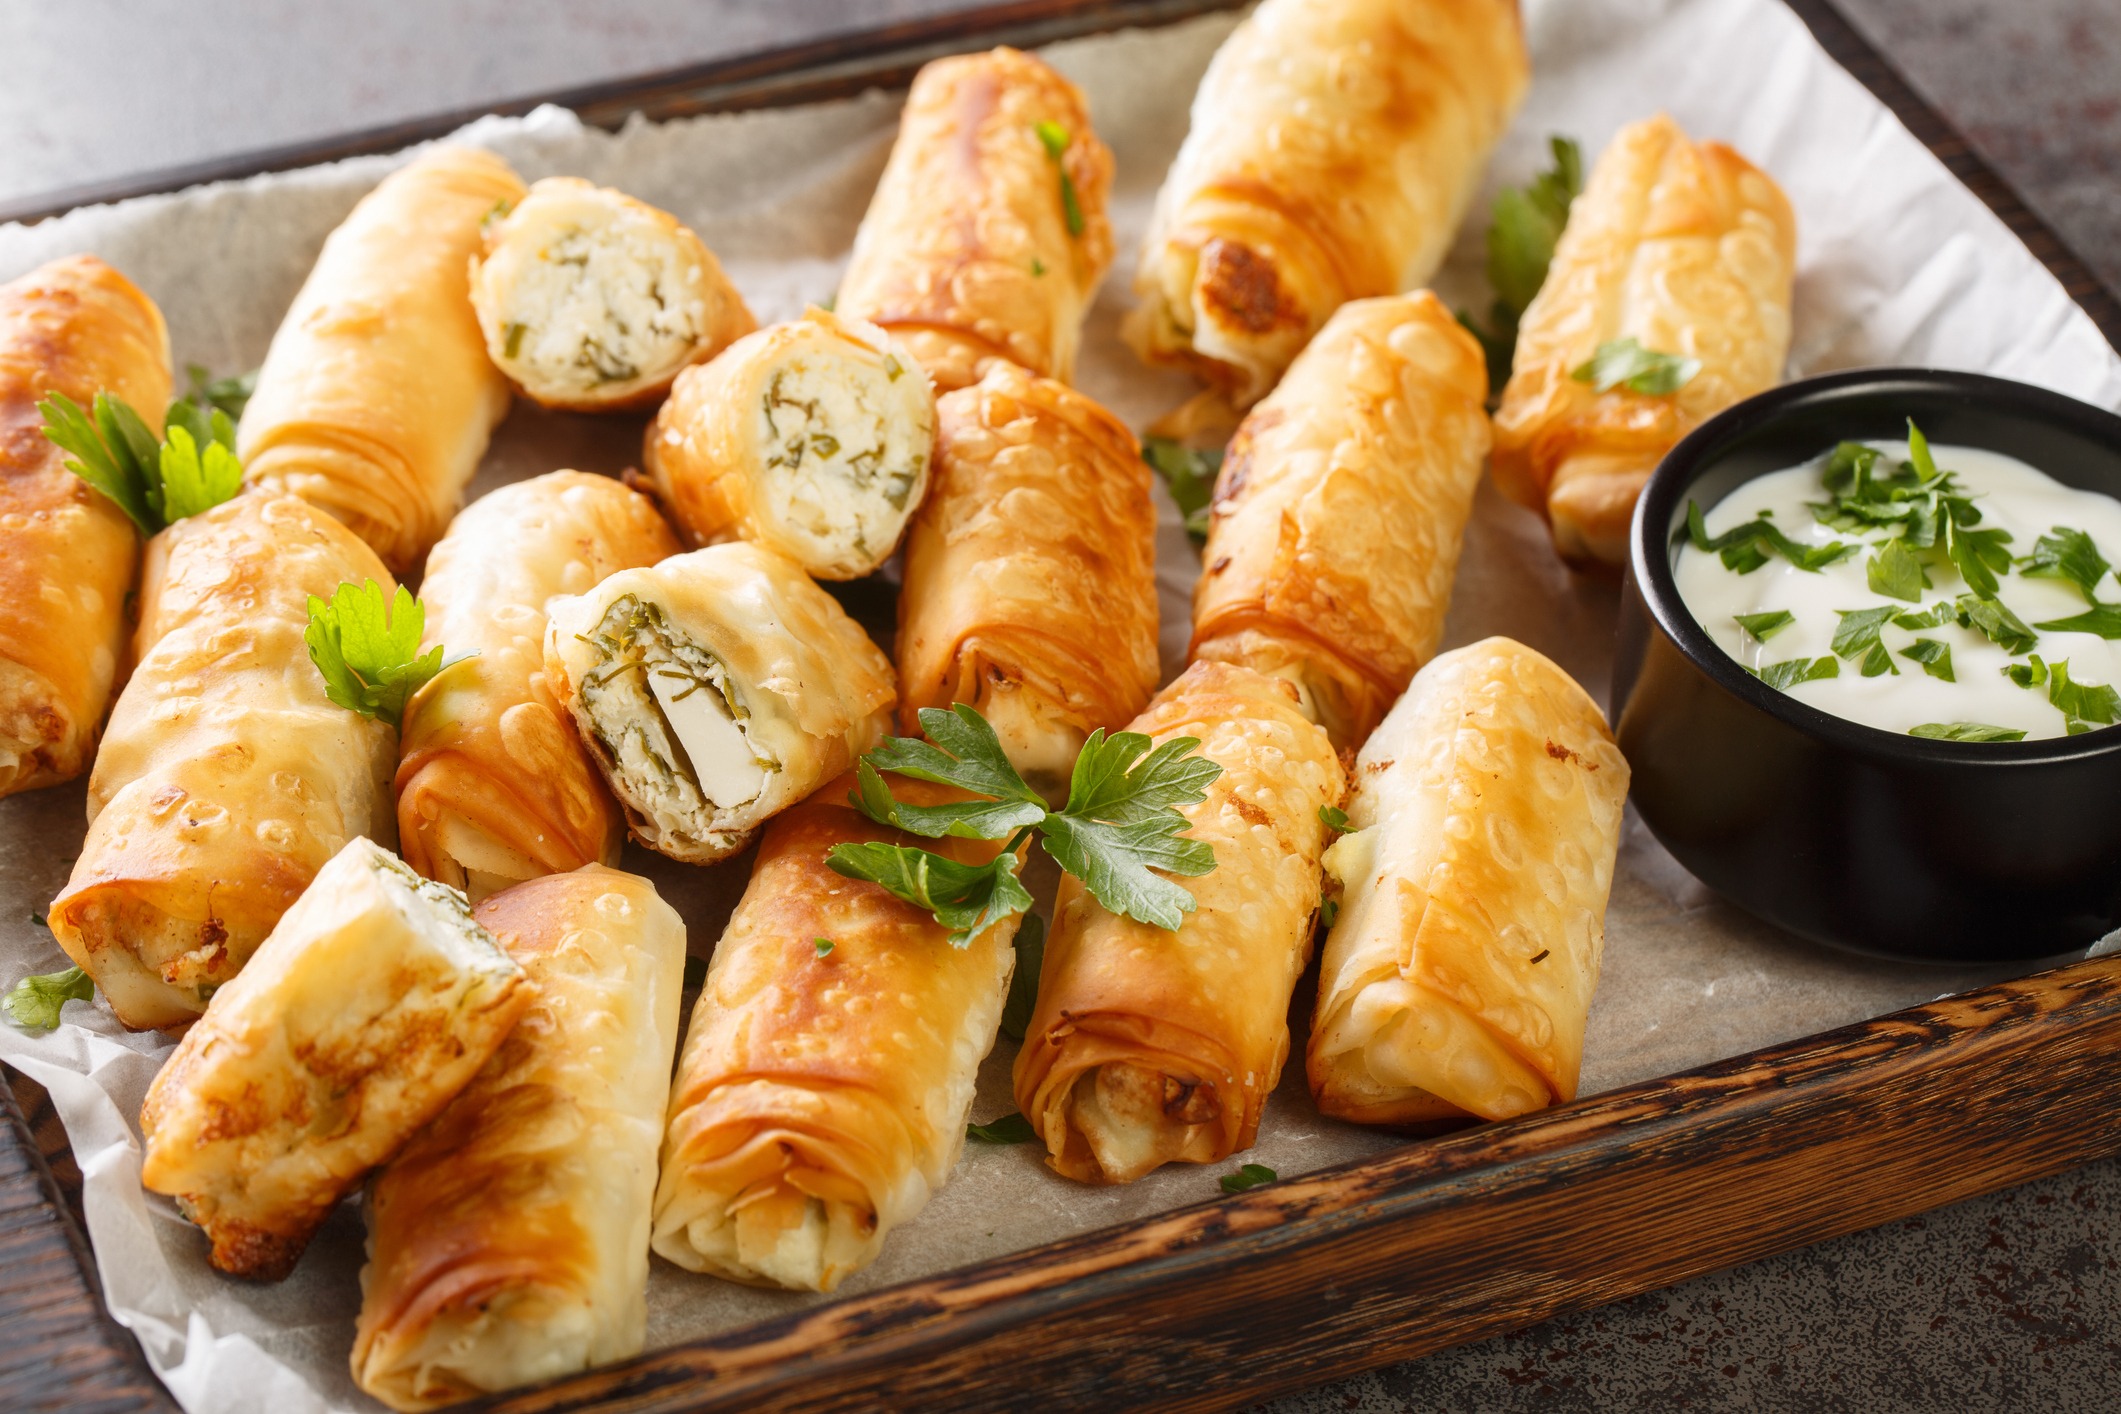 Rolled, baked phyllo dough with herbs and cheese inside. Dip of yogurt and herbs on the side. All in a wooden tray lined with paper.